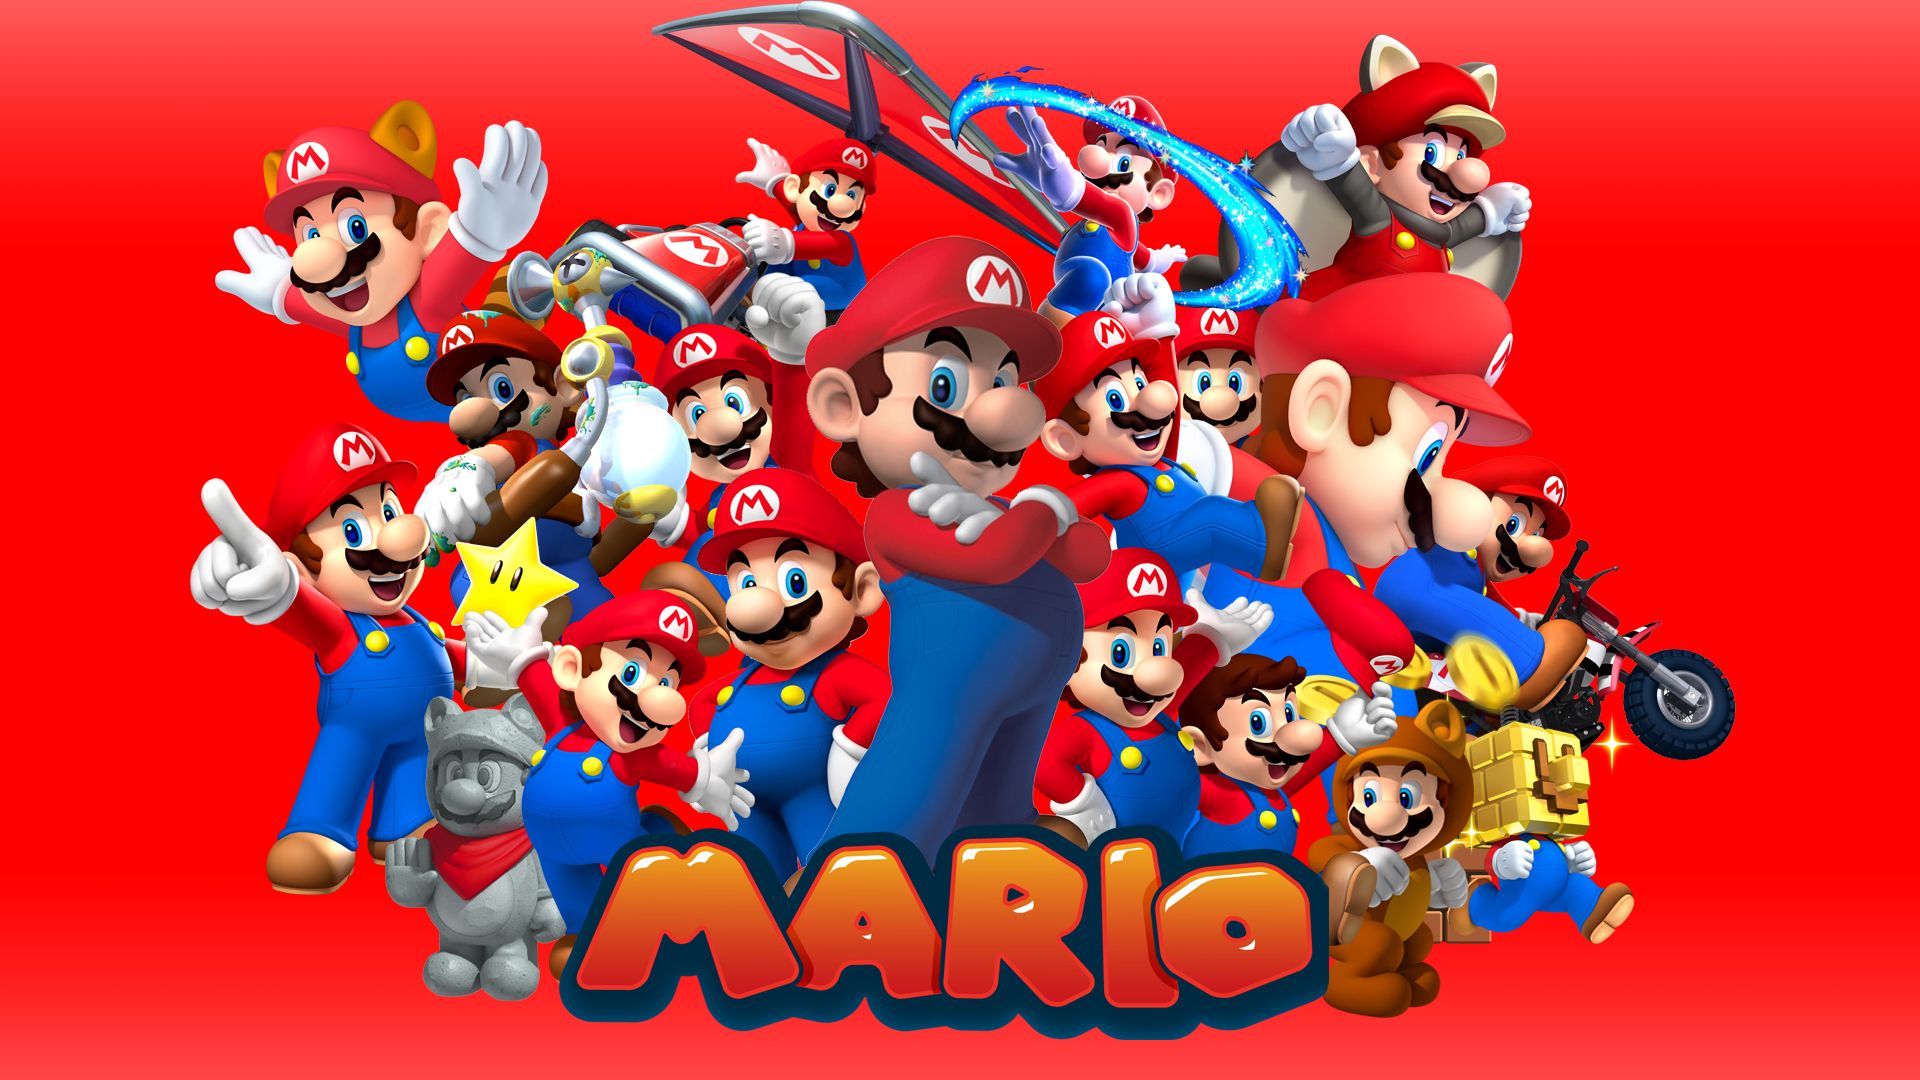 Free download Mario And Luigi Wallpaper 66 [1920x1080] for your Desktop, Mobile & Tablet. Explore Mario And Luigi Wallpaper. Luigi Wallpaper, Mario and Luigi Wallpaper HD, Mario Bros Wallpaper HD